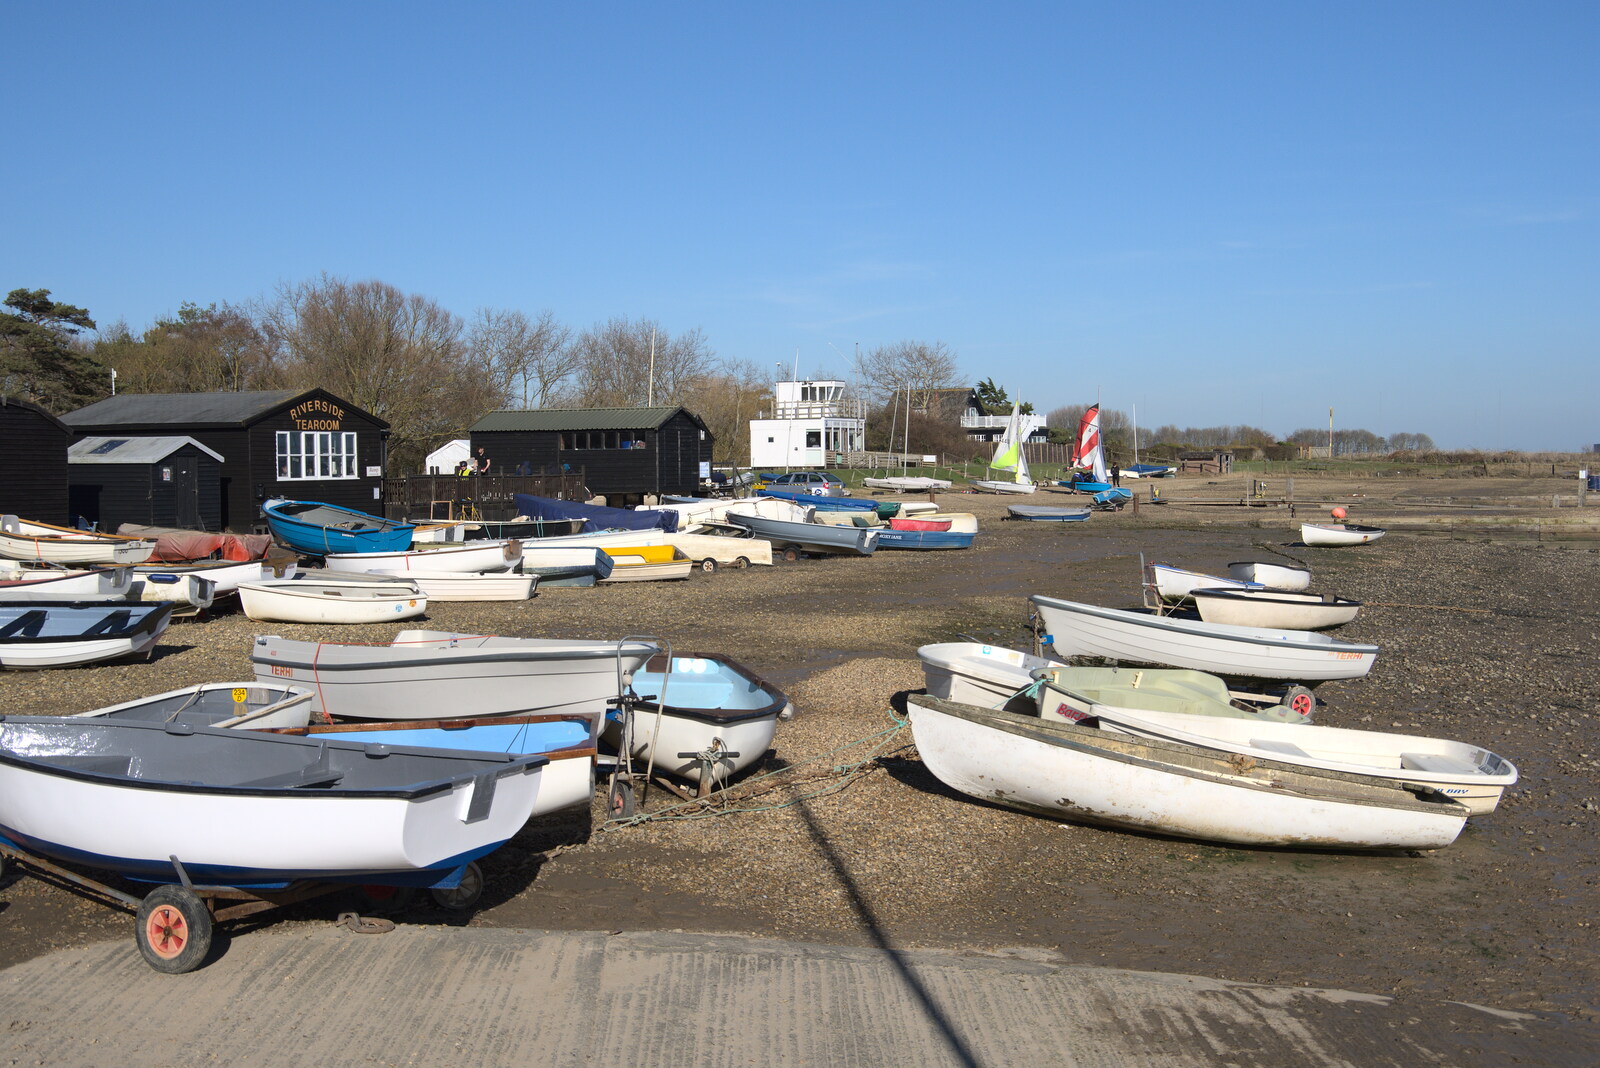 Boats in the boatyard from A Trip to Orford Castle, Orford, Suffolk - 26th February 2022